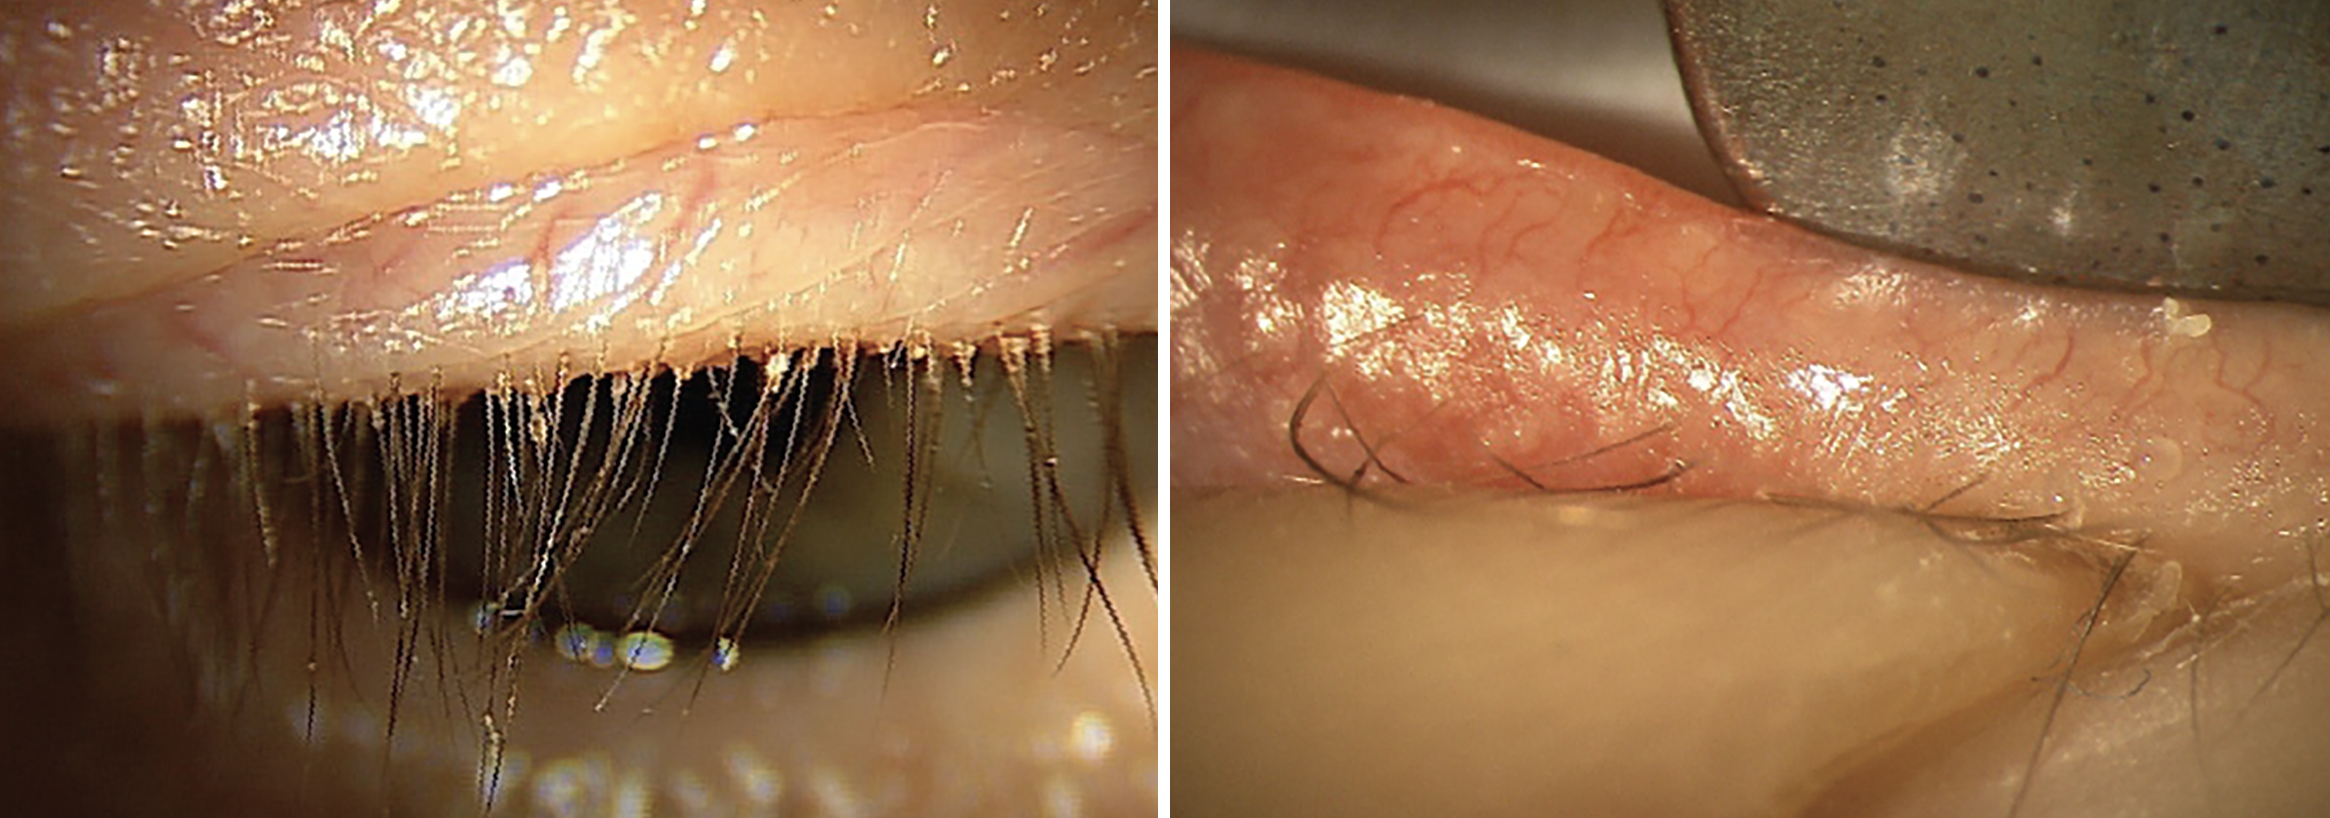 Fig. 3a. (Left) Grade 3+ collarettes at the base of a patient’s eyelashes. Collarettes are pathognomonic for Demodex blepharitis. It is important to have patients look down to examine the base of the eyelashes, as this finding is easily missed when the patient is looking straight ahead. Fig. 3b. (Right) Poor paste-like meibum expression and grade 2+ telangiectasia at the eyelid margin. Eyelid telangiectasia indicates ocular rosacea. Warm compresses would not be ideal for this type of MGD patient, as the heat exacerbates inflammation in ocular rosacea. 